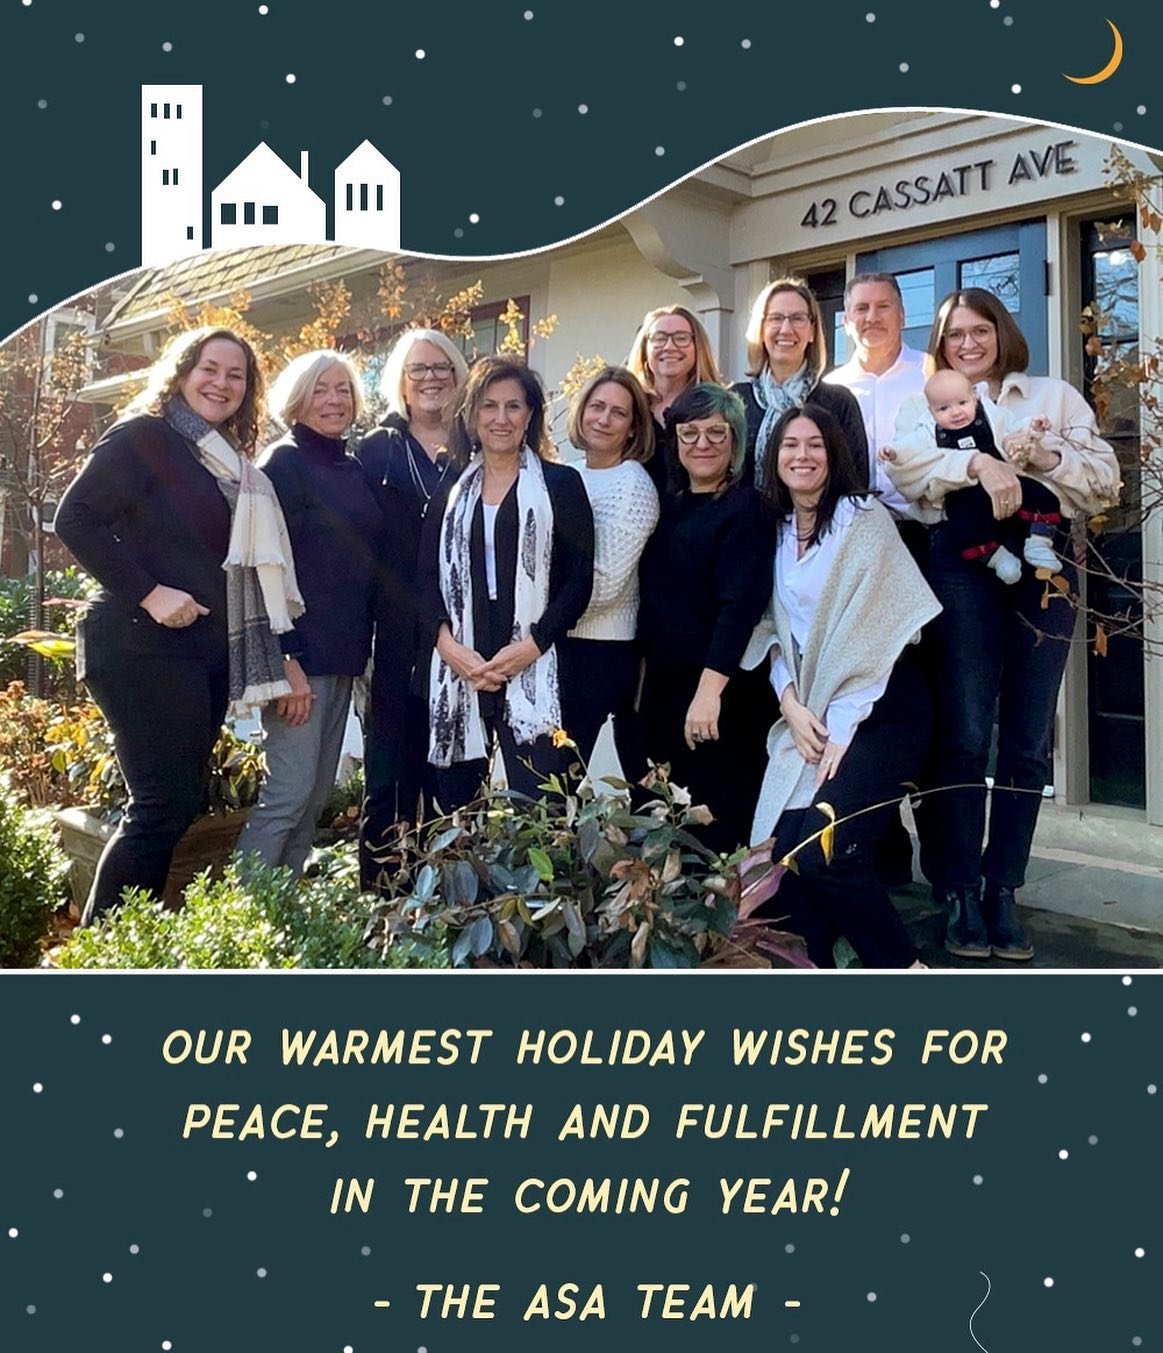 We are signing off until the new year! Thank you to all of our wonderful clients, vendors, and contractors for another successful year.

Wishing you and yours a wonderful holiday season ❤️